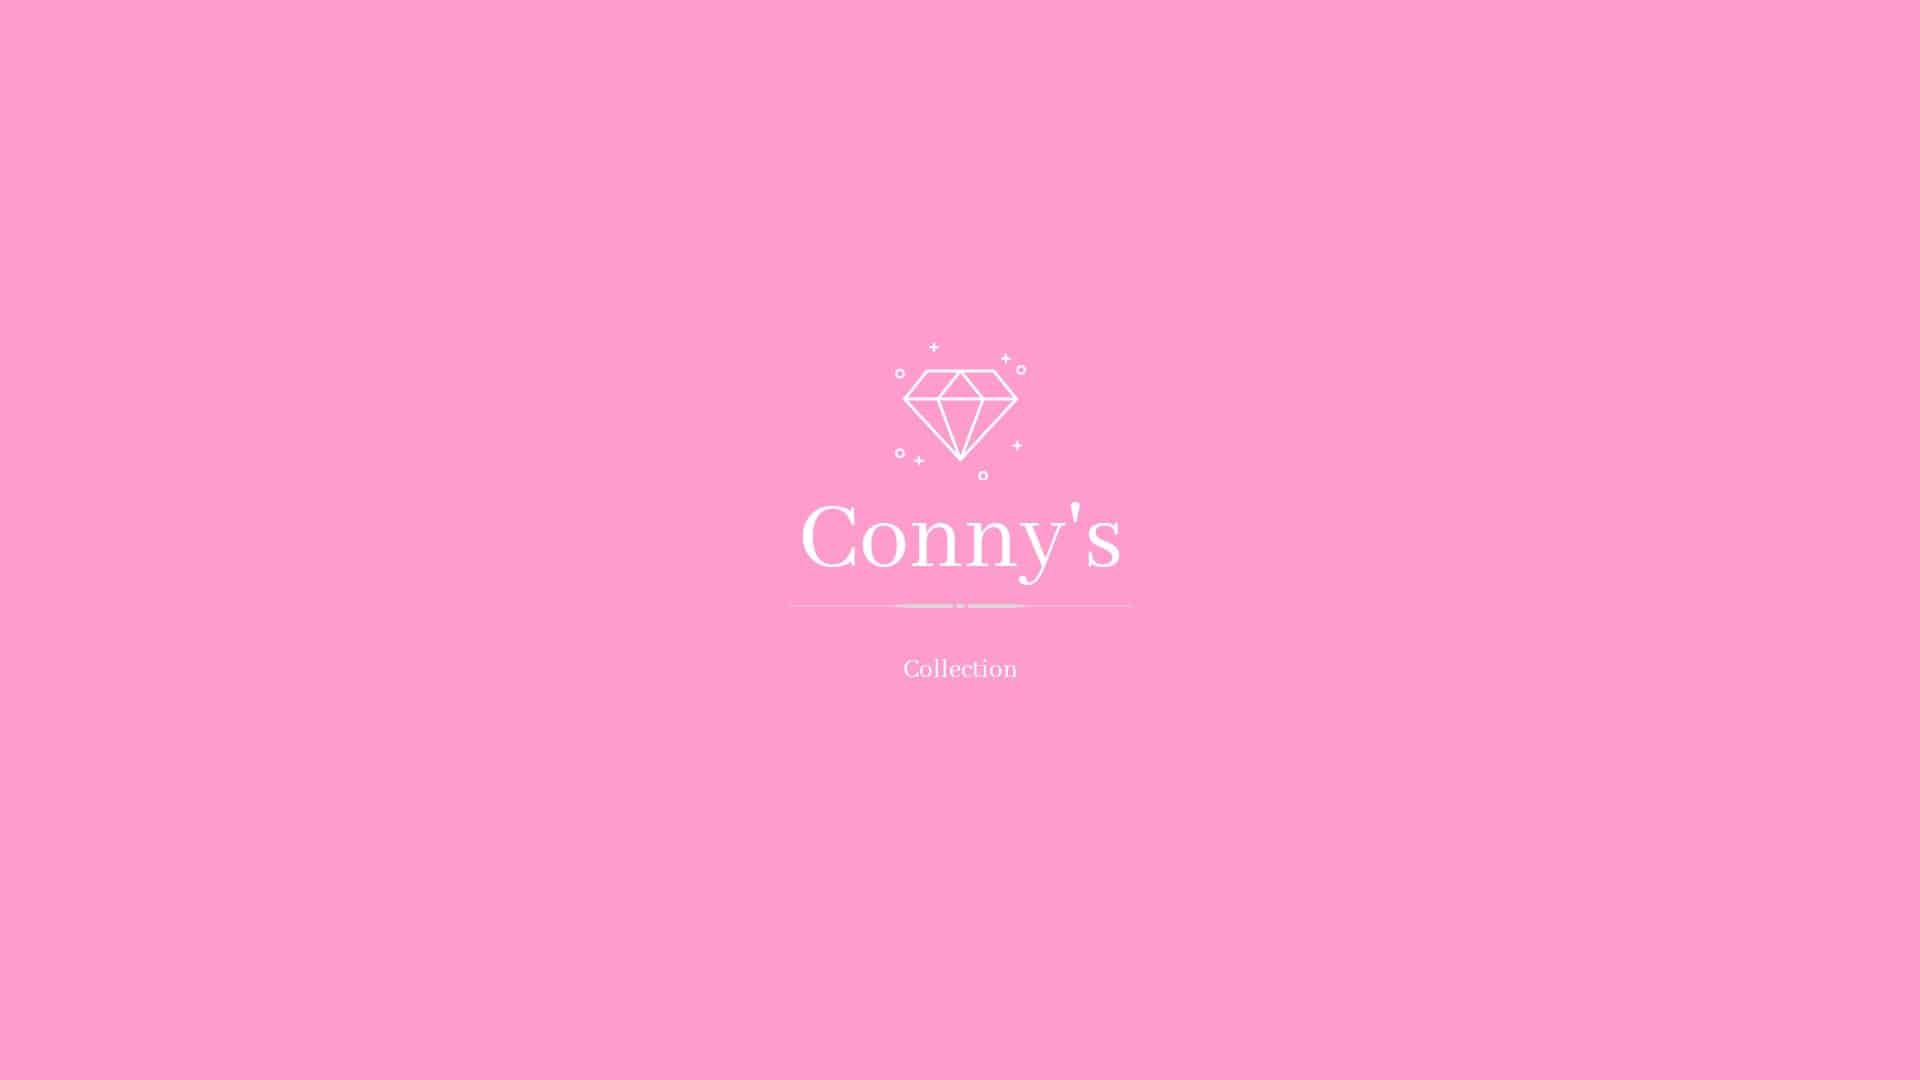 Conny's